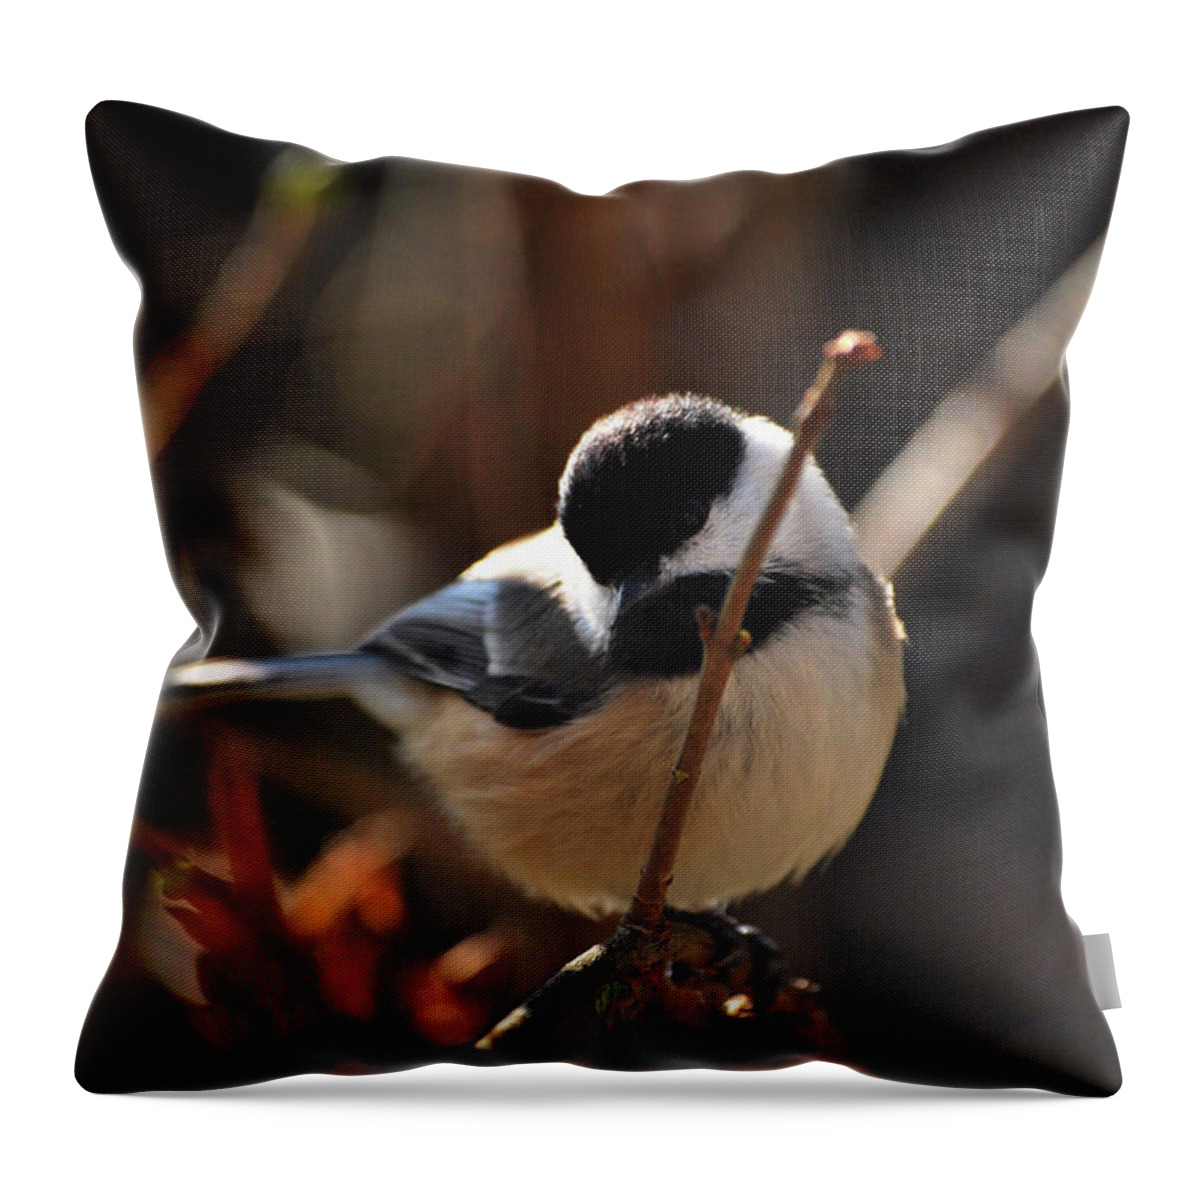 Bird Throw Pillow featuring the photograph Come Fly With Me by Lori Tambakis